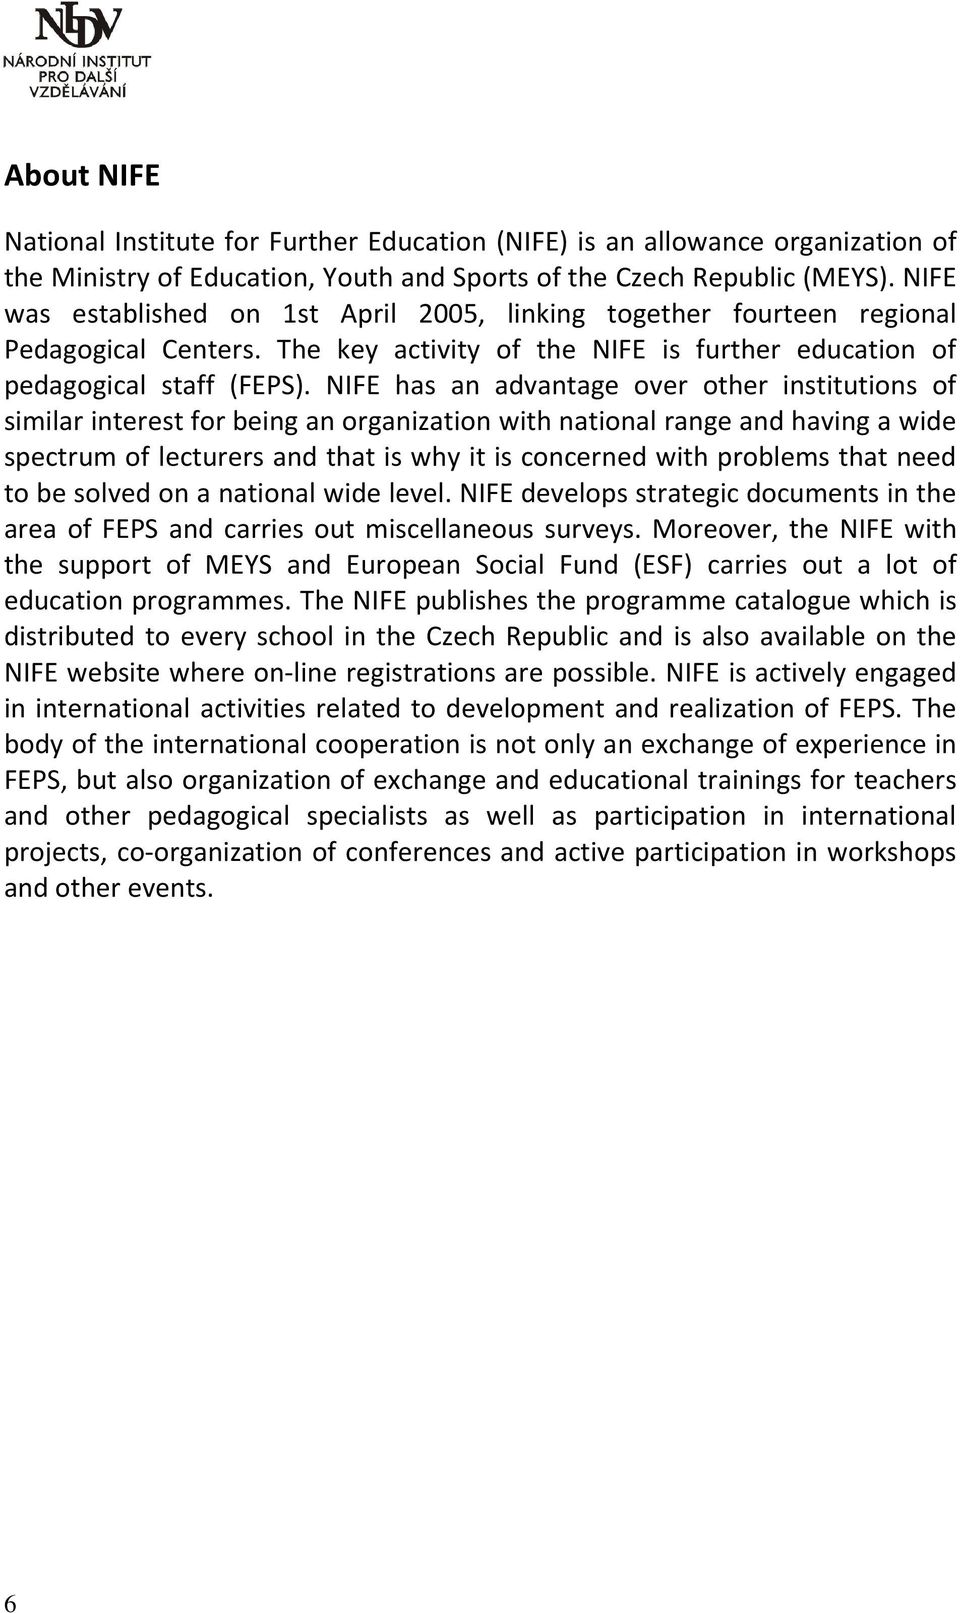 NIFE has an advantage over other institutions of similar interest for being an organization with national range and having a wide spectrum of lecturers and that is why it is concerned with problems